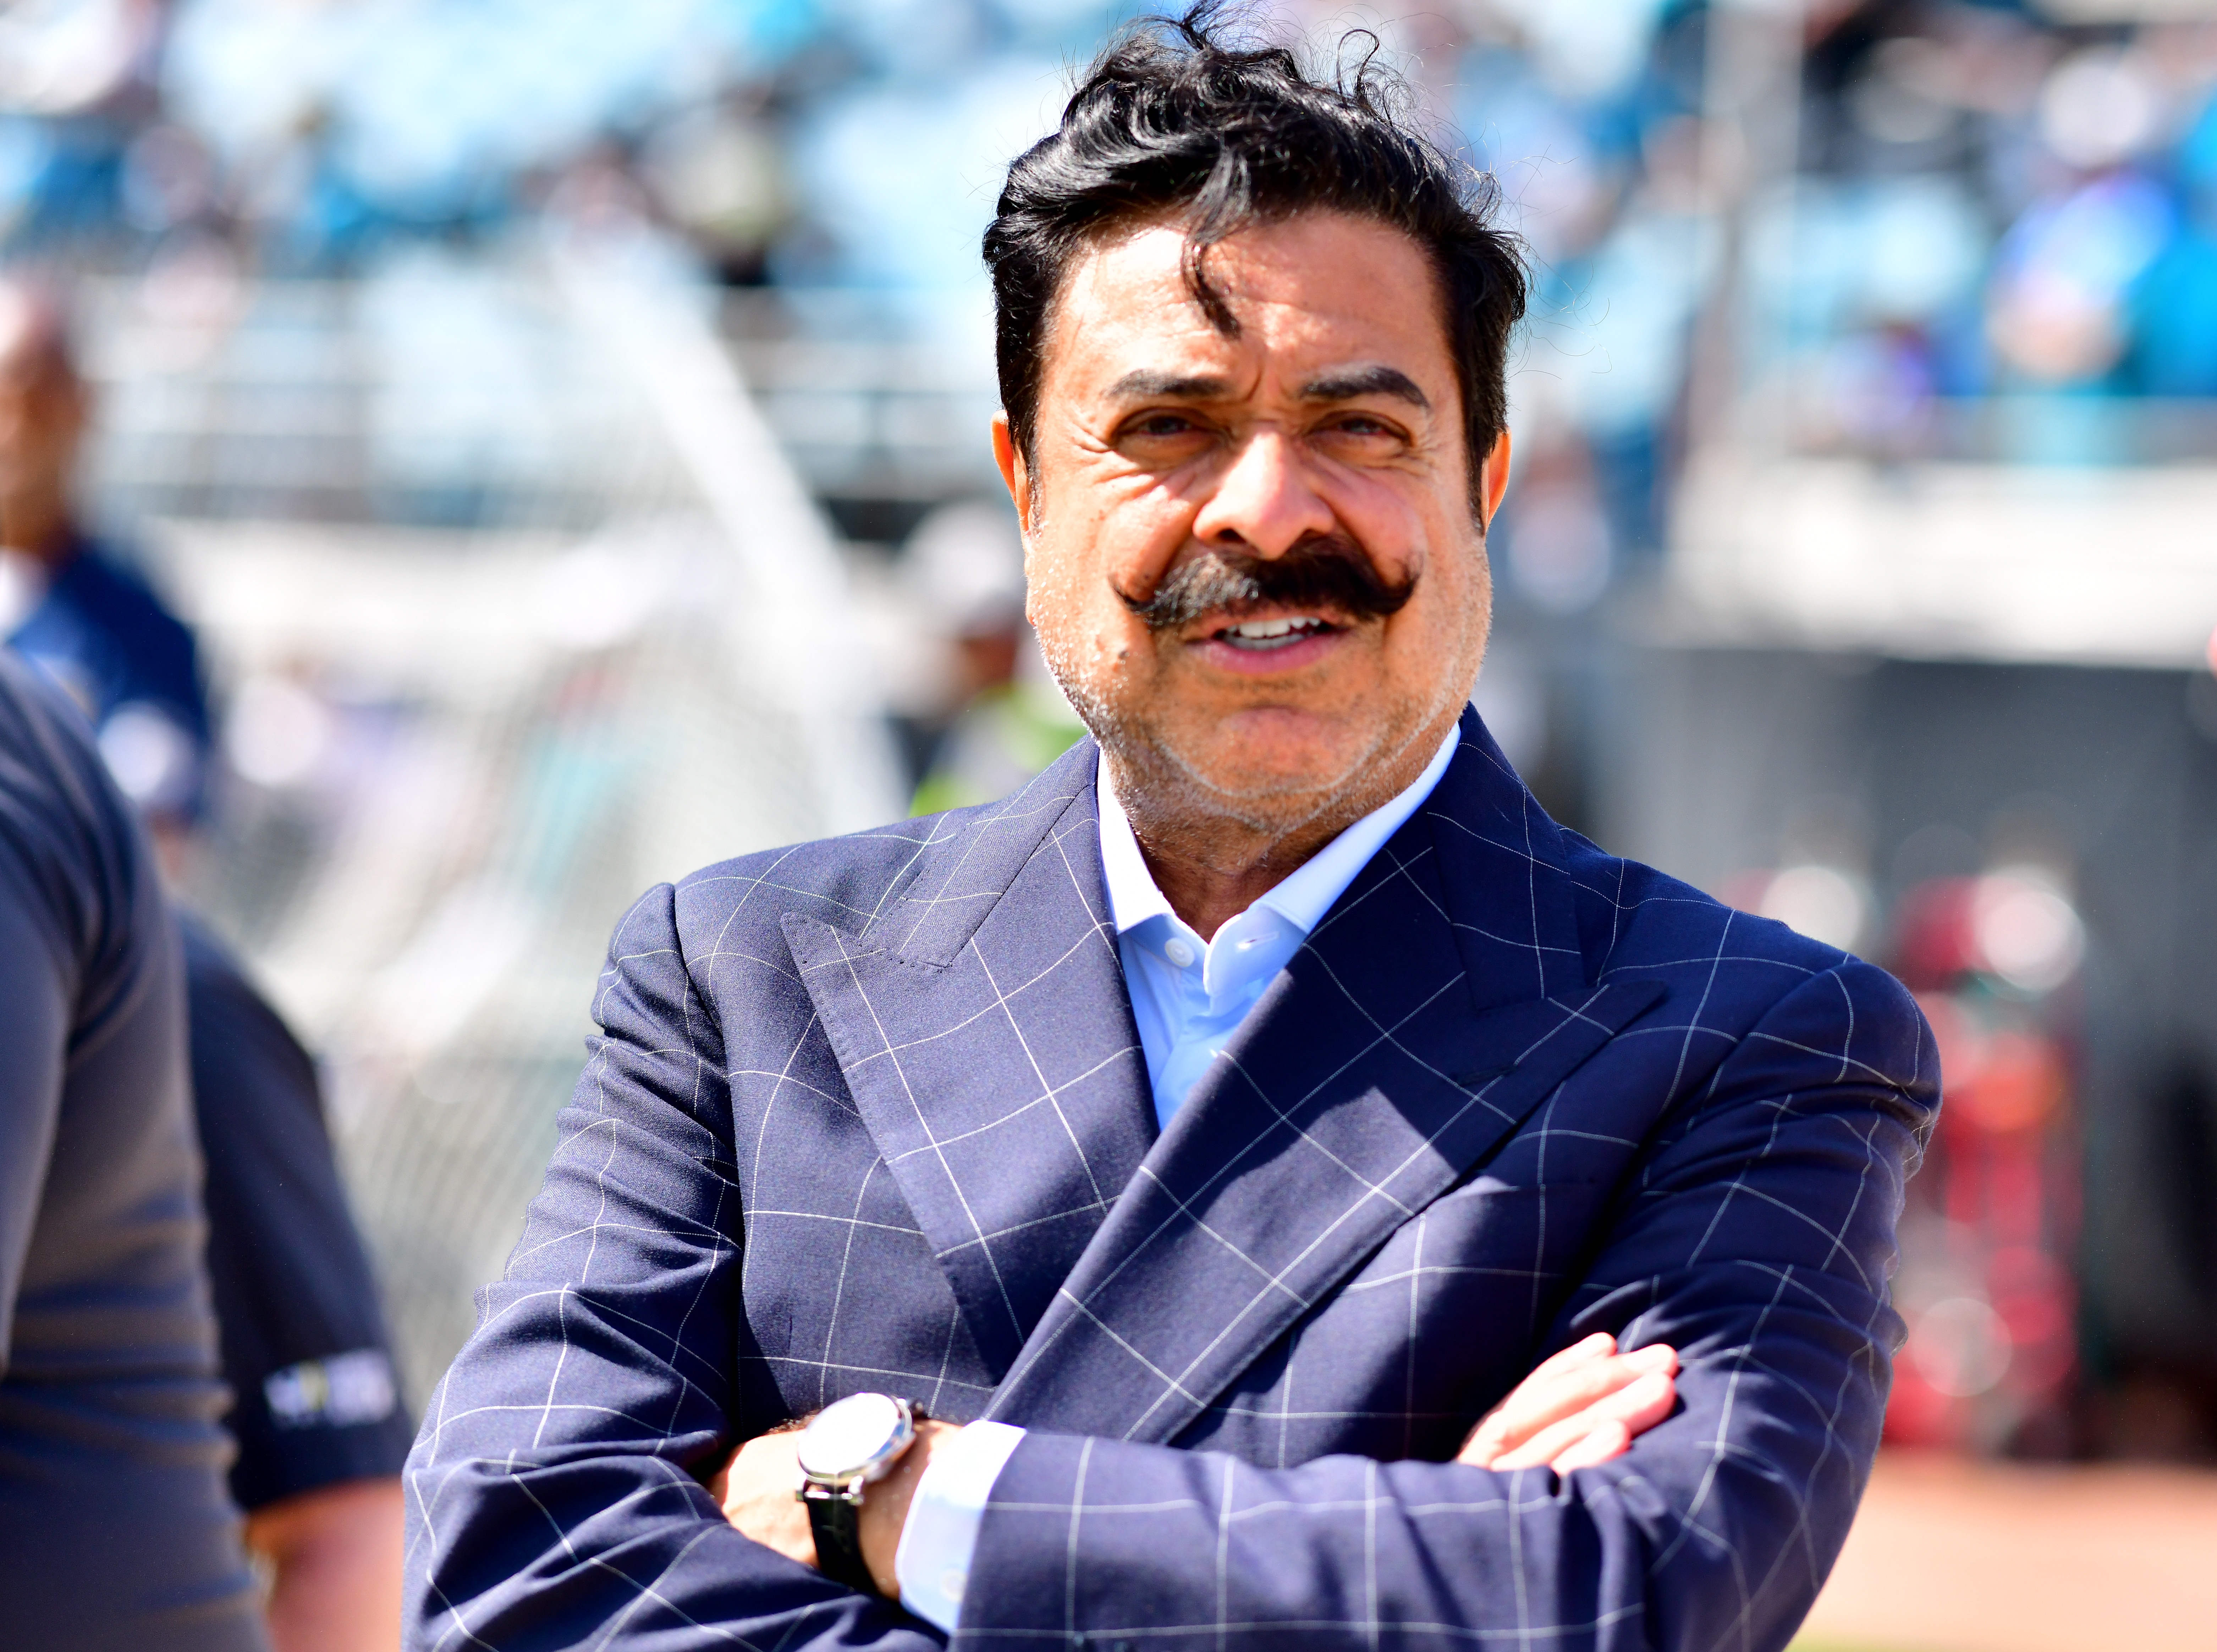 Jaguars owner Shahid Khan looks on before a game